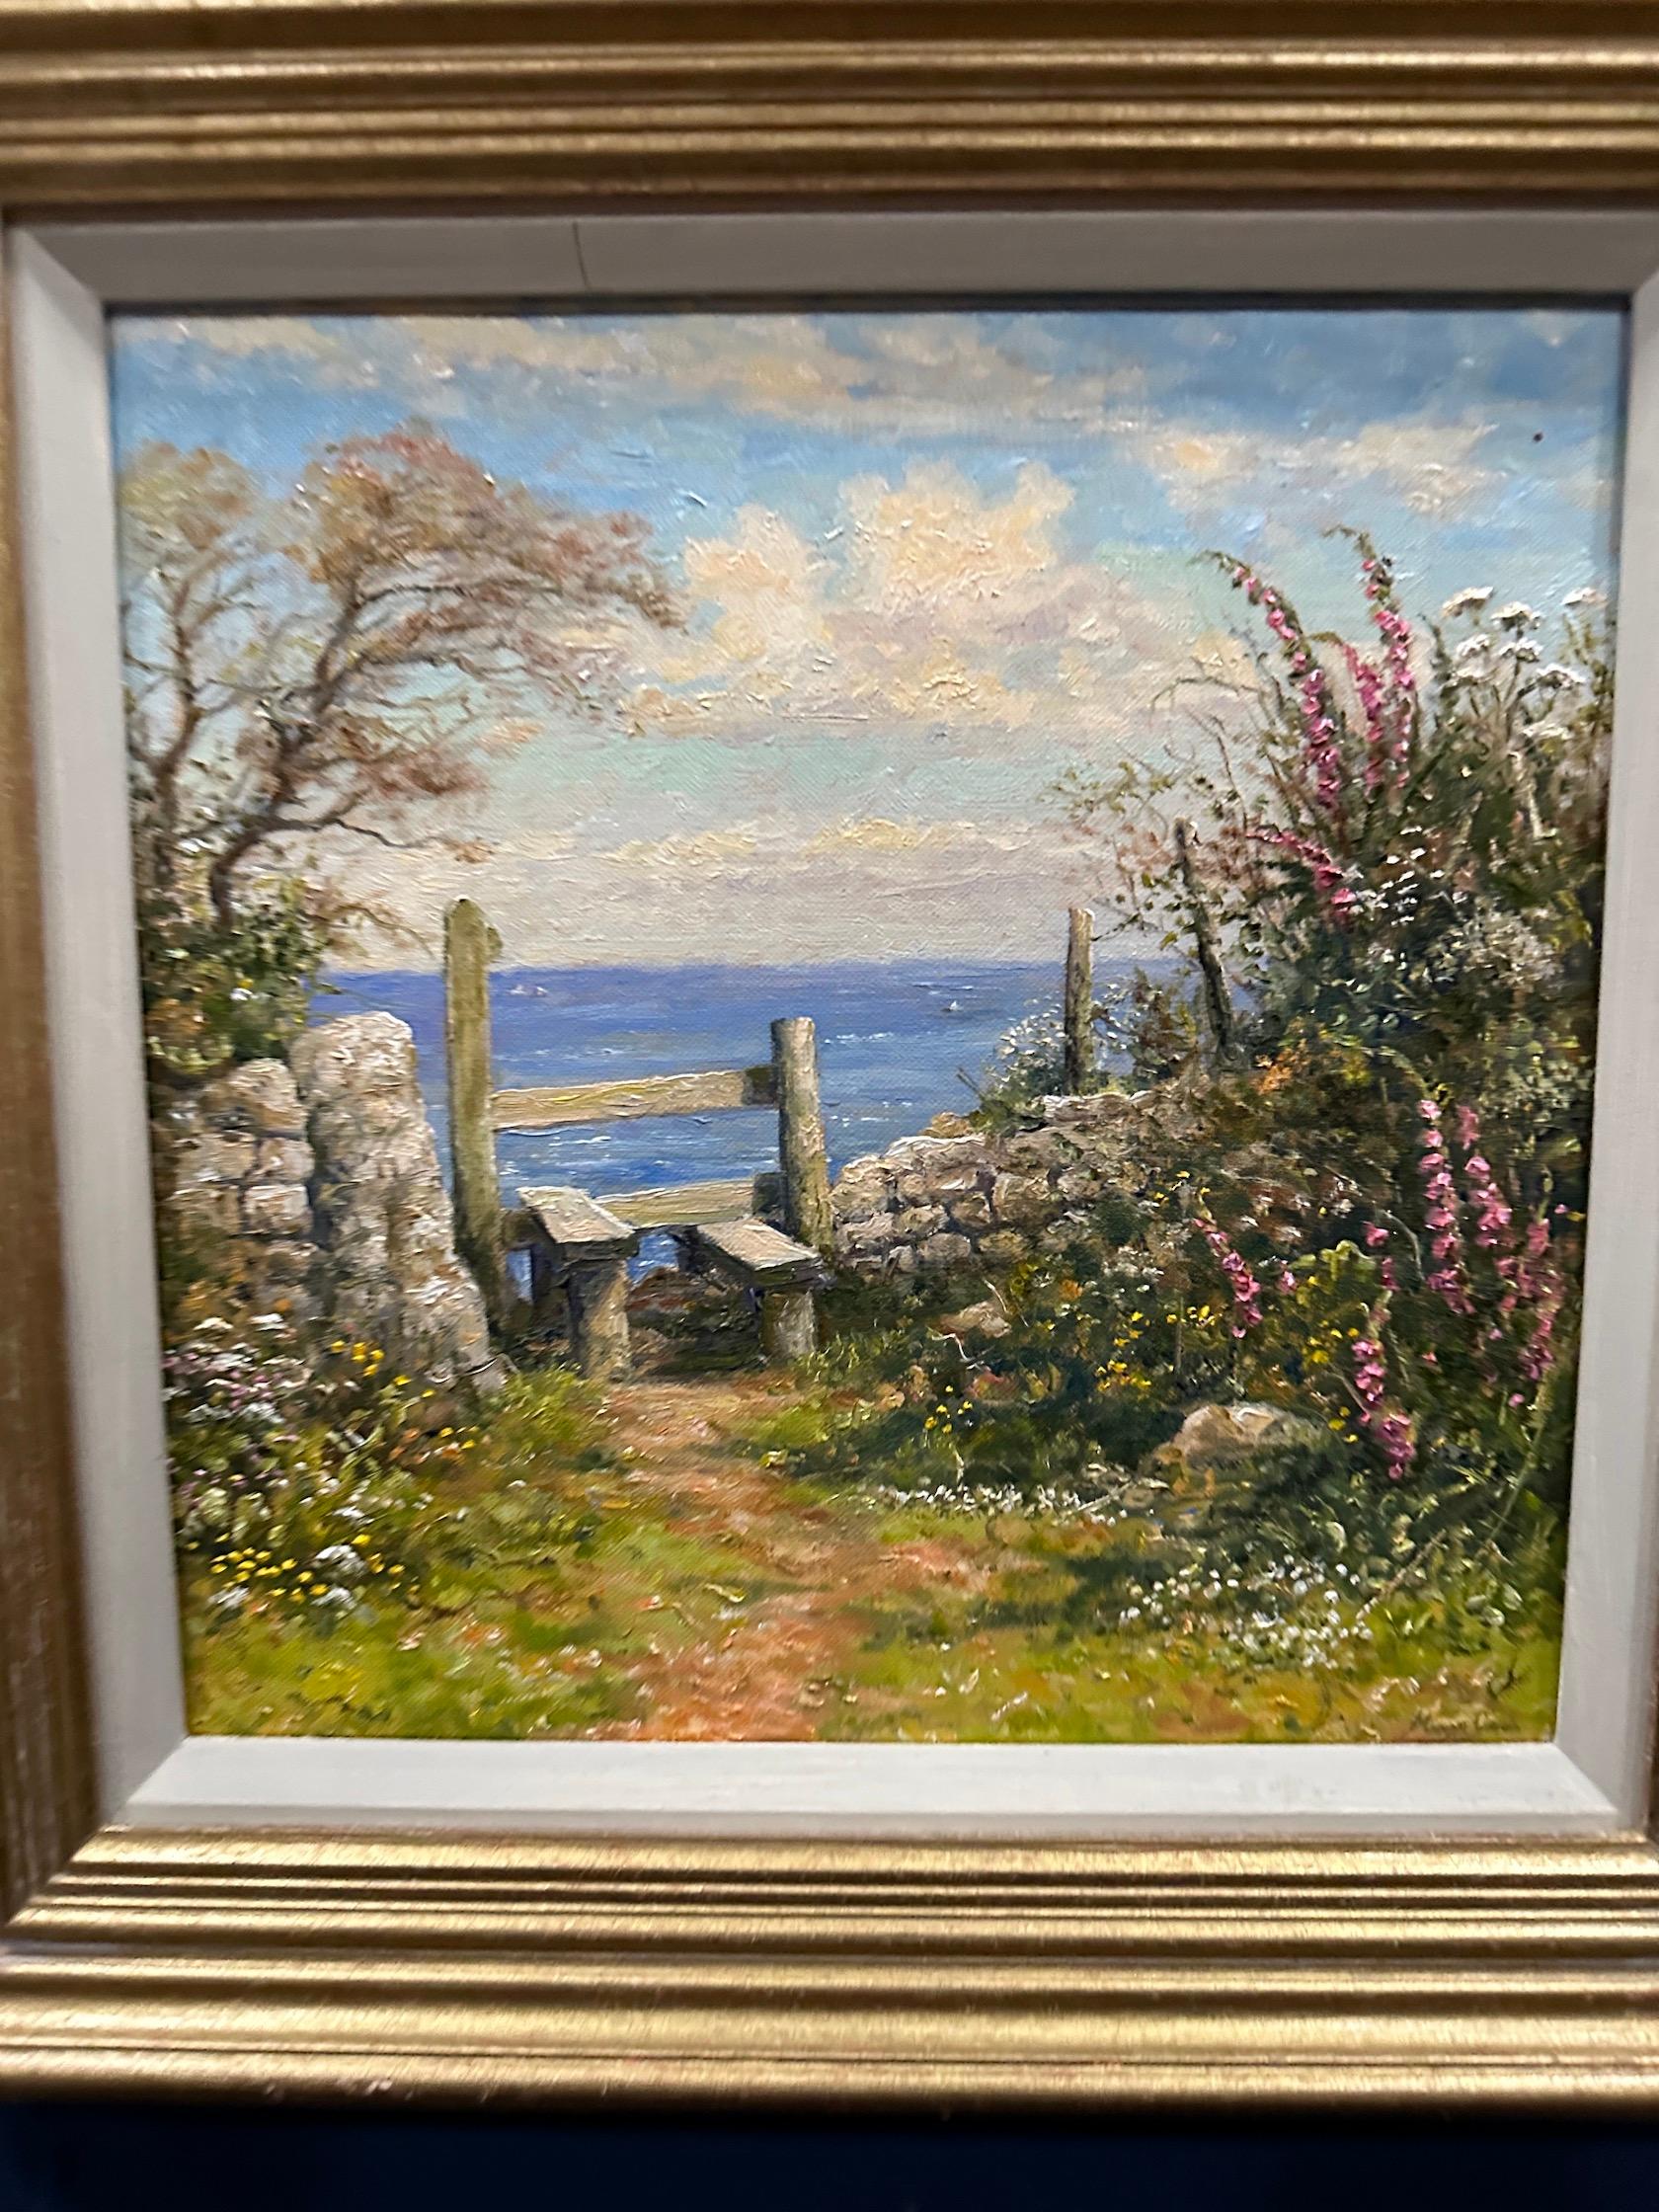 Impressionist English landscape over looking the Ocean during an English Summer  - Painting by Mervyn Goode